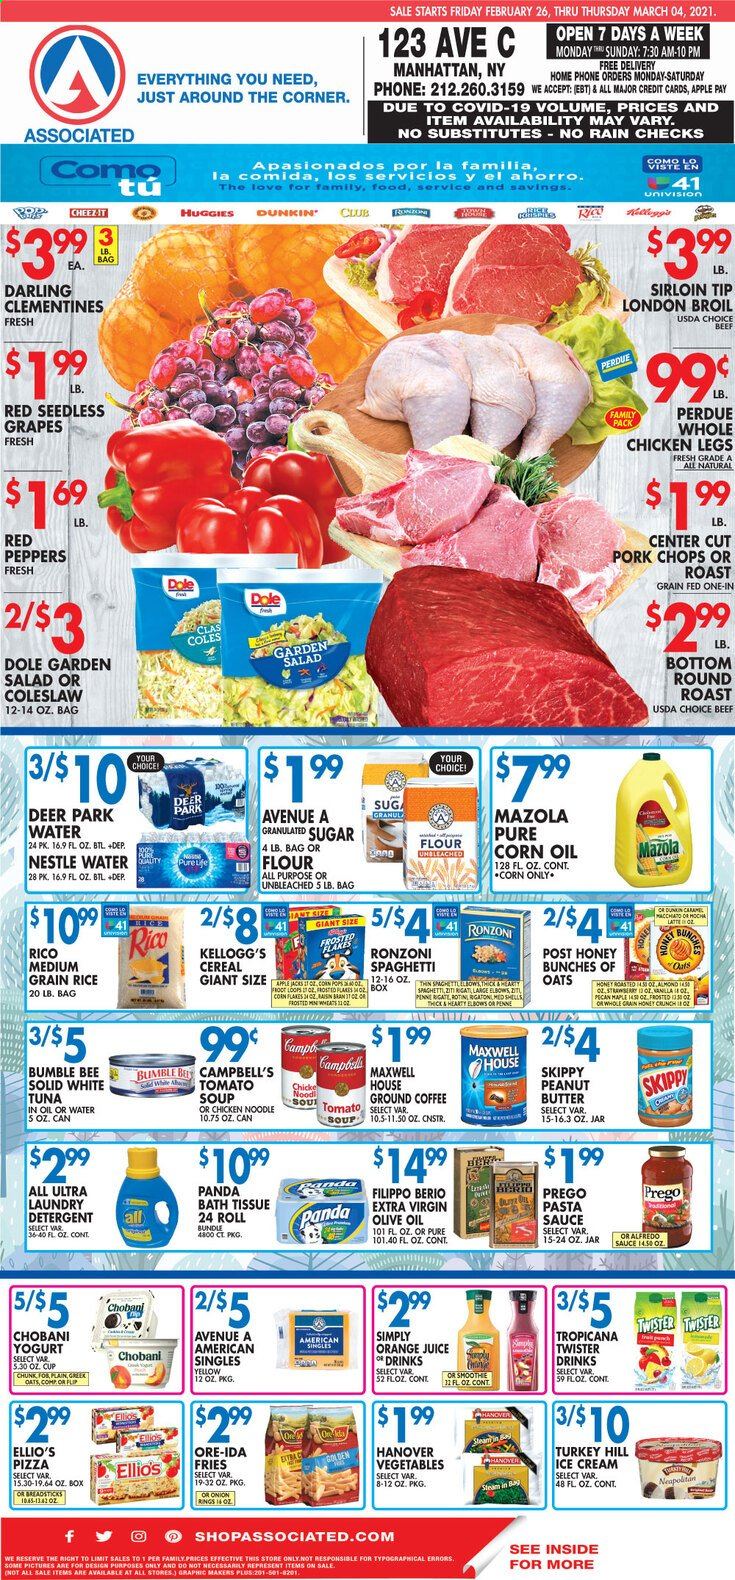 thumbnail - Associated Supermarkets Flyer - 02/26/2021 - 03/04/2021 - Sales products - Dole, seedless grapes, 7 Days, tuna, Campbell's, coleslaw, tomato soup, pizza, onion rings, soup, salad, sauce, Alfredo sauce, Perdue®, yoghurt, Chobani, ice cream, corn, potato fries, Ore-Ida, Nestlé, Kellogg's, flour, granulated sugar, sugar, oats, cereals, rice, spaghetti, whole grain rice, noodles, penne, caramel, pasta sauce, corn oil, extra virgin olive oil, olive oil, peanut butter, orange juice, juice, Tropicana Twister, Maxwell House, coffee, ground coffee, whole chicken, chicken legs, beef meat, round roast, pork chops, pork meat, Huggies, bath tissue, detergent, laundry detergent, clementines, grapes. Page 1.